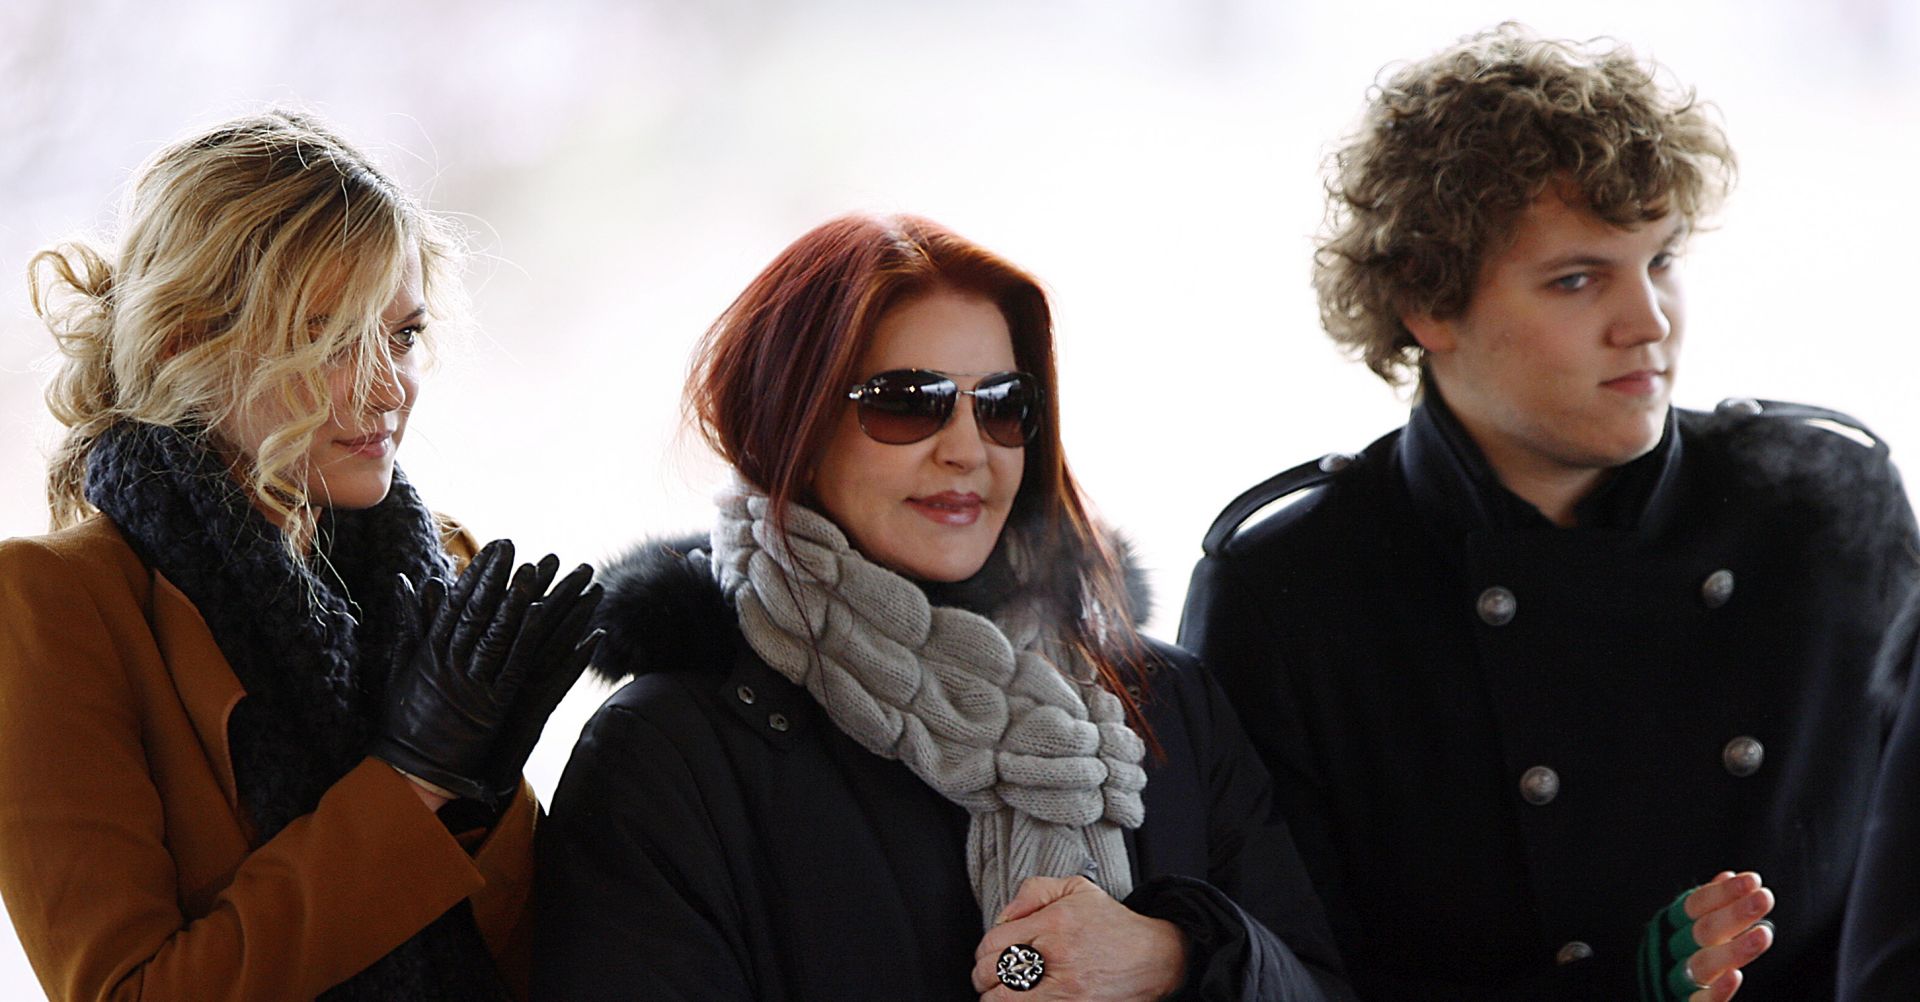 epa08542994 (FILE) - Priscilla Presley (C) stands between her grandchildren Riley Keough (L) and Benjamin Keough (R) during the celebration of what would have been entertainer Elvis Presley's 75th birthday near Graceland, Memphis, Tennessee, USA, 08 January 2010 (reissued 13 July 2020). Elvis Presley's grandson Benjamin Keough died at the age of 27, his mother's spokesperson announced on 13 July 2020.  EPA/LANCE MURPHEY *** Local Caption *** 01983504